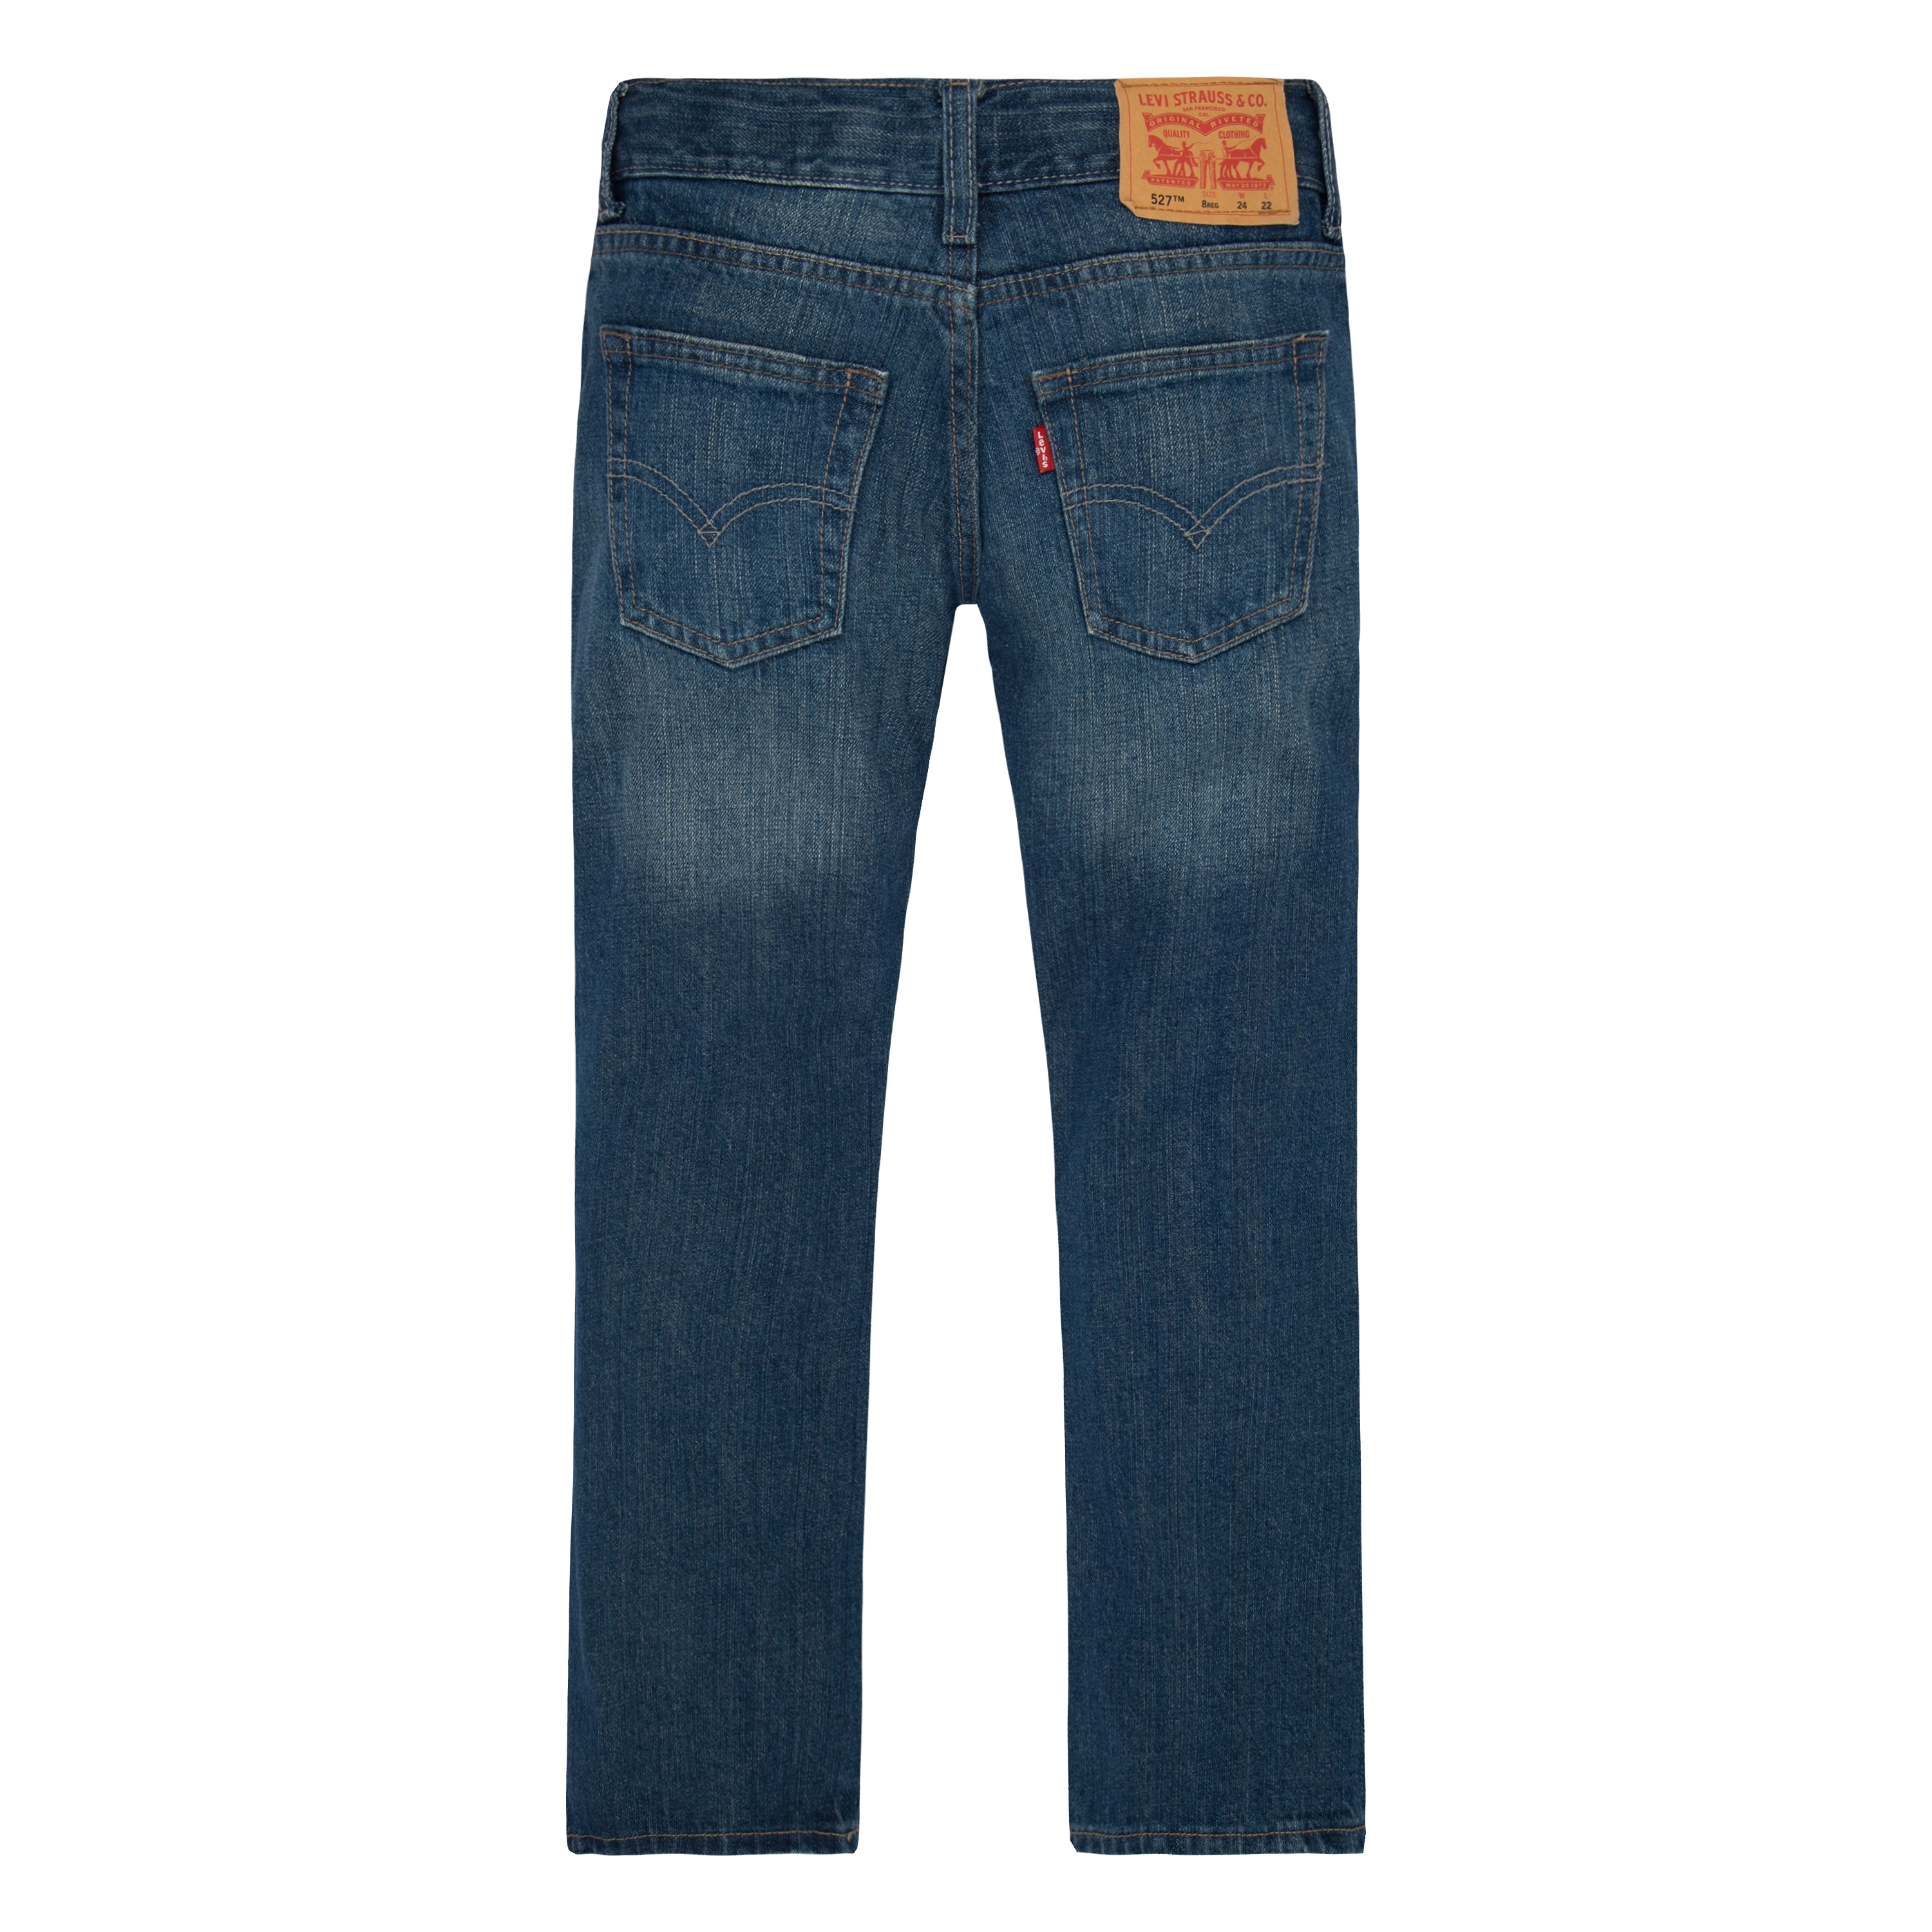 Levi's Boys' Boot Cut Jeans - image 3 of 5